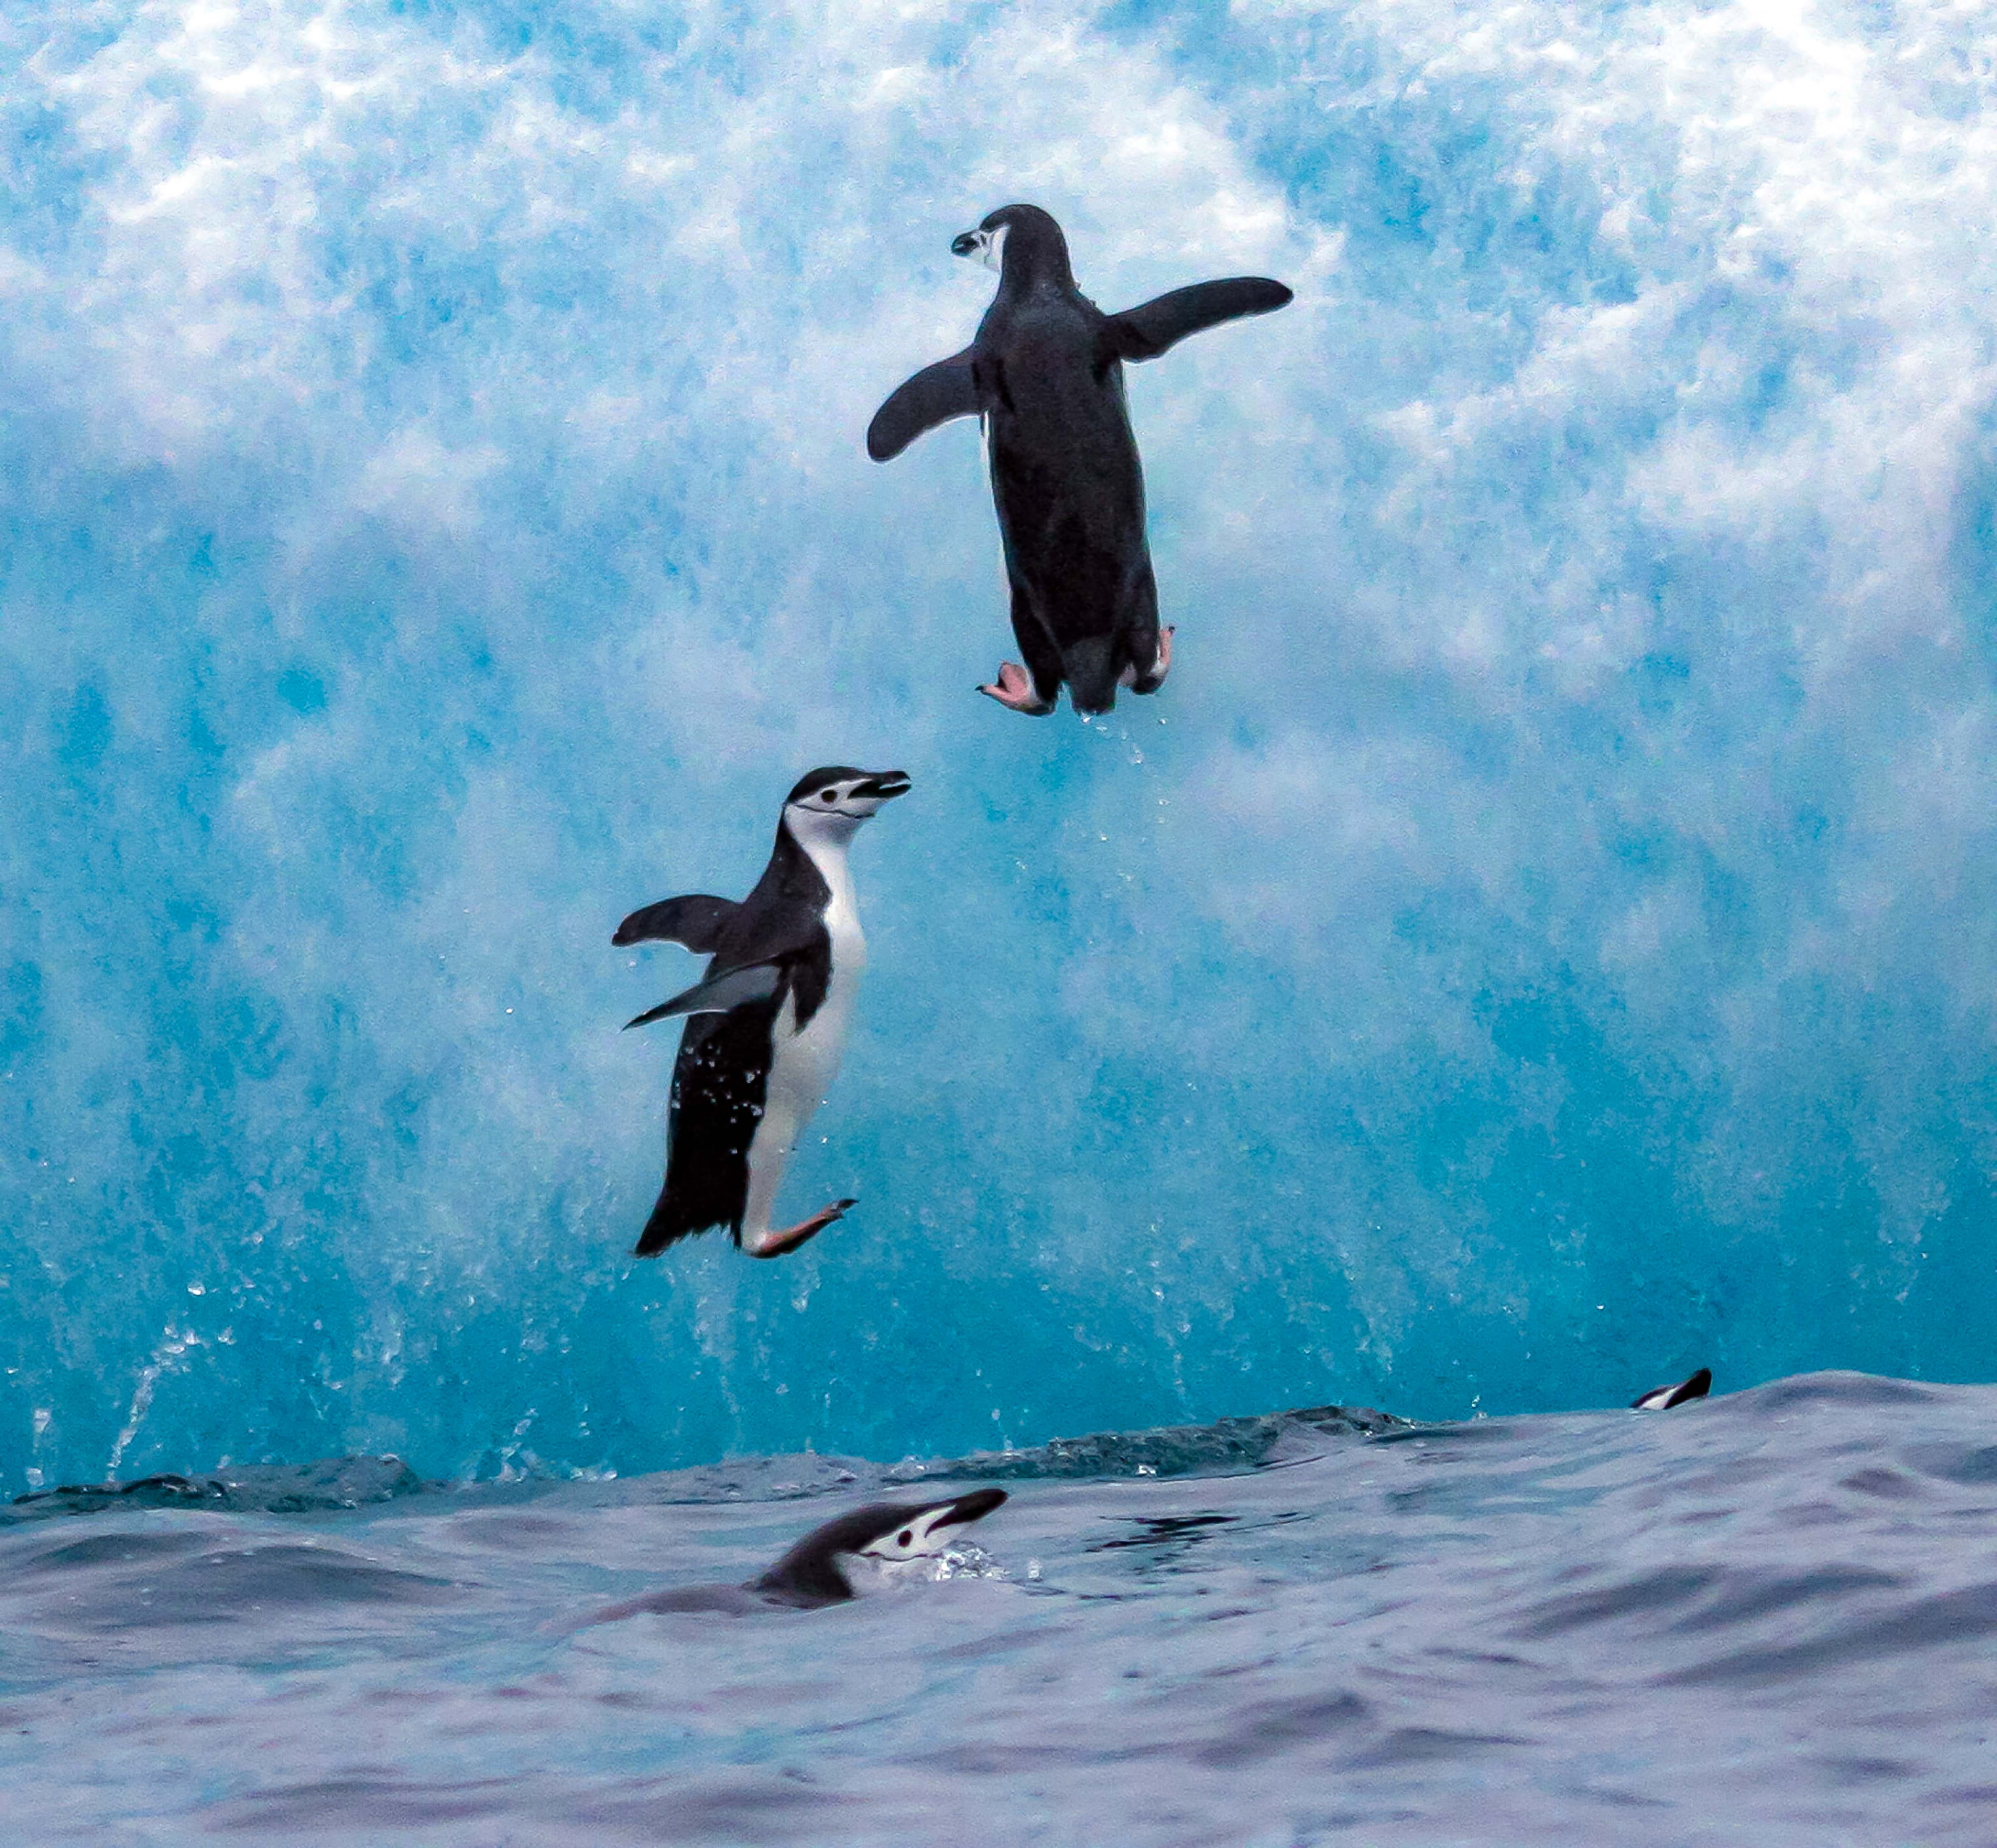 South Sandwich Islands, Saunders Island, Two Penguins Jumping On Iceberg, 2006